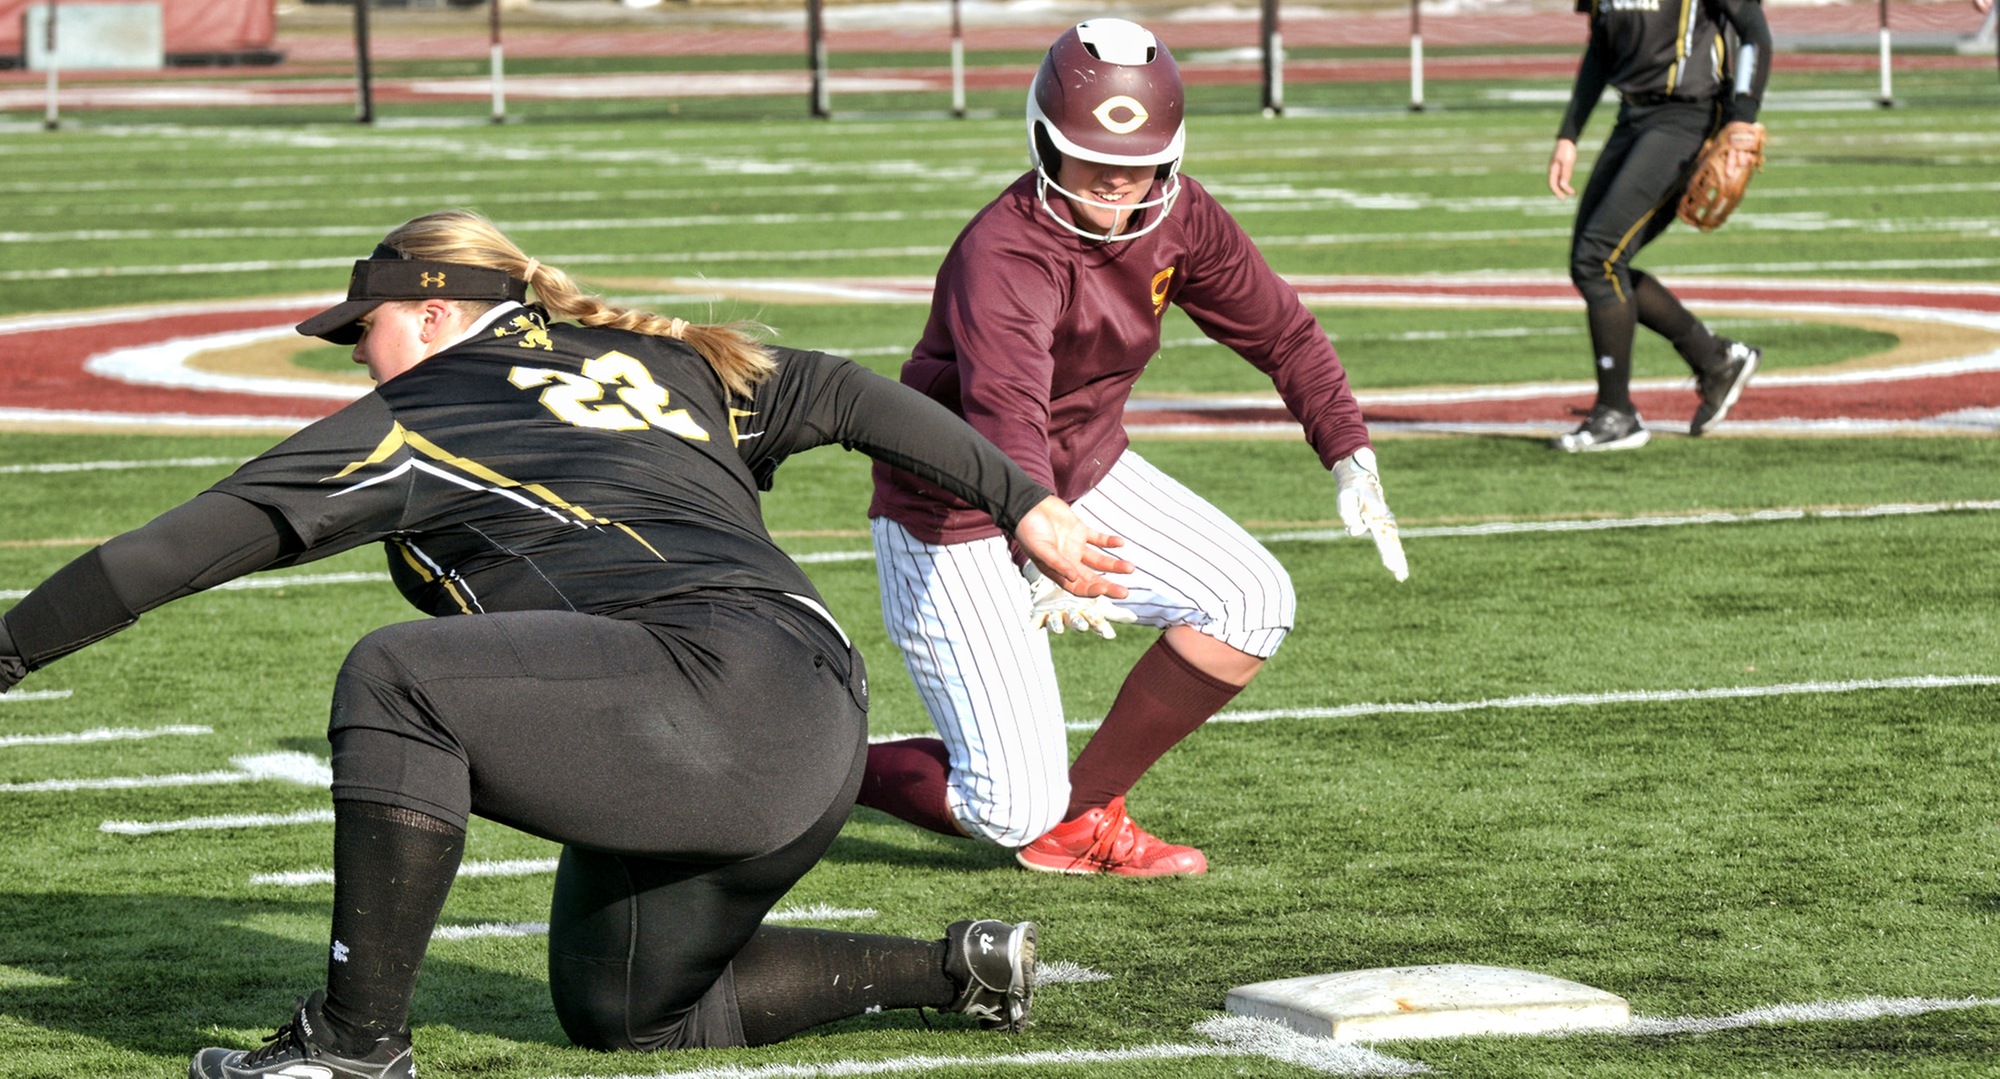 Nicole Johannes dives back into first base on an attempted pickoff play during the second game of the Cobbers' DH with St. Olaf.